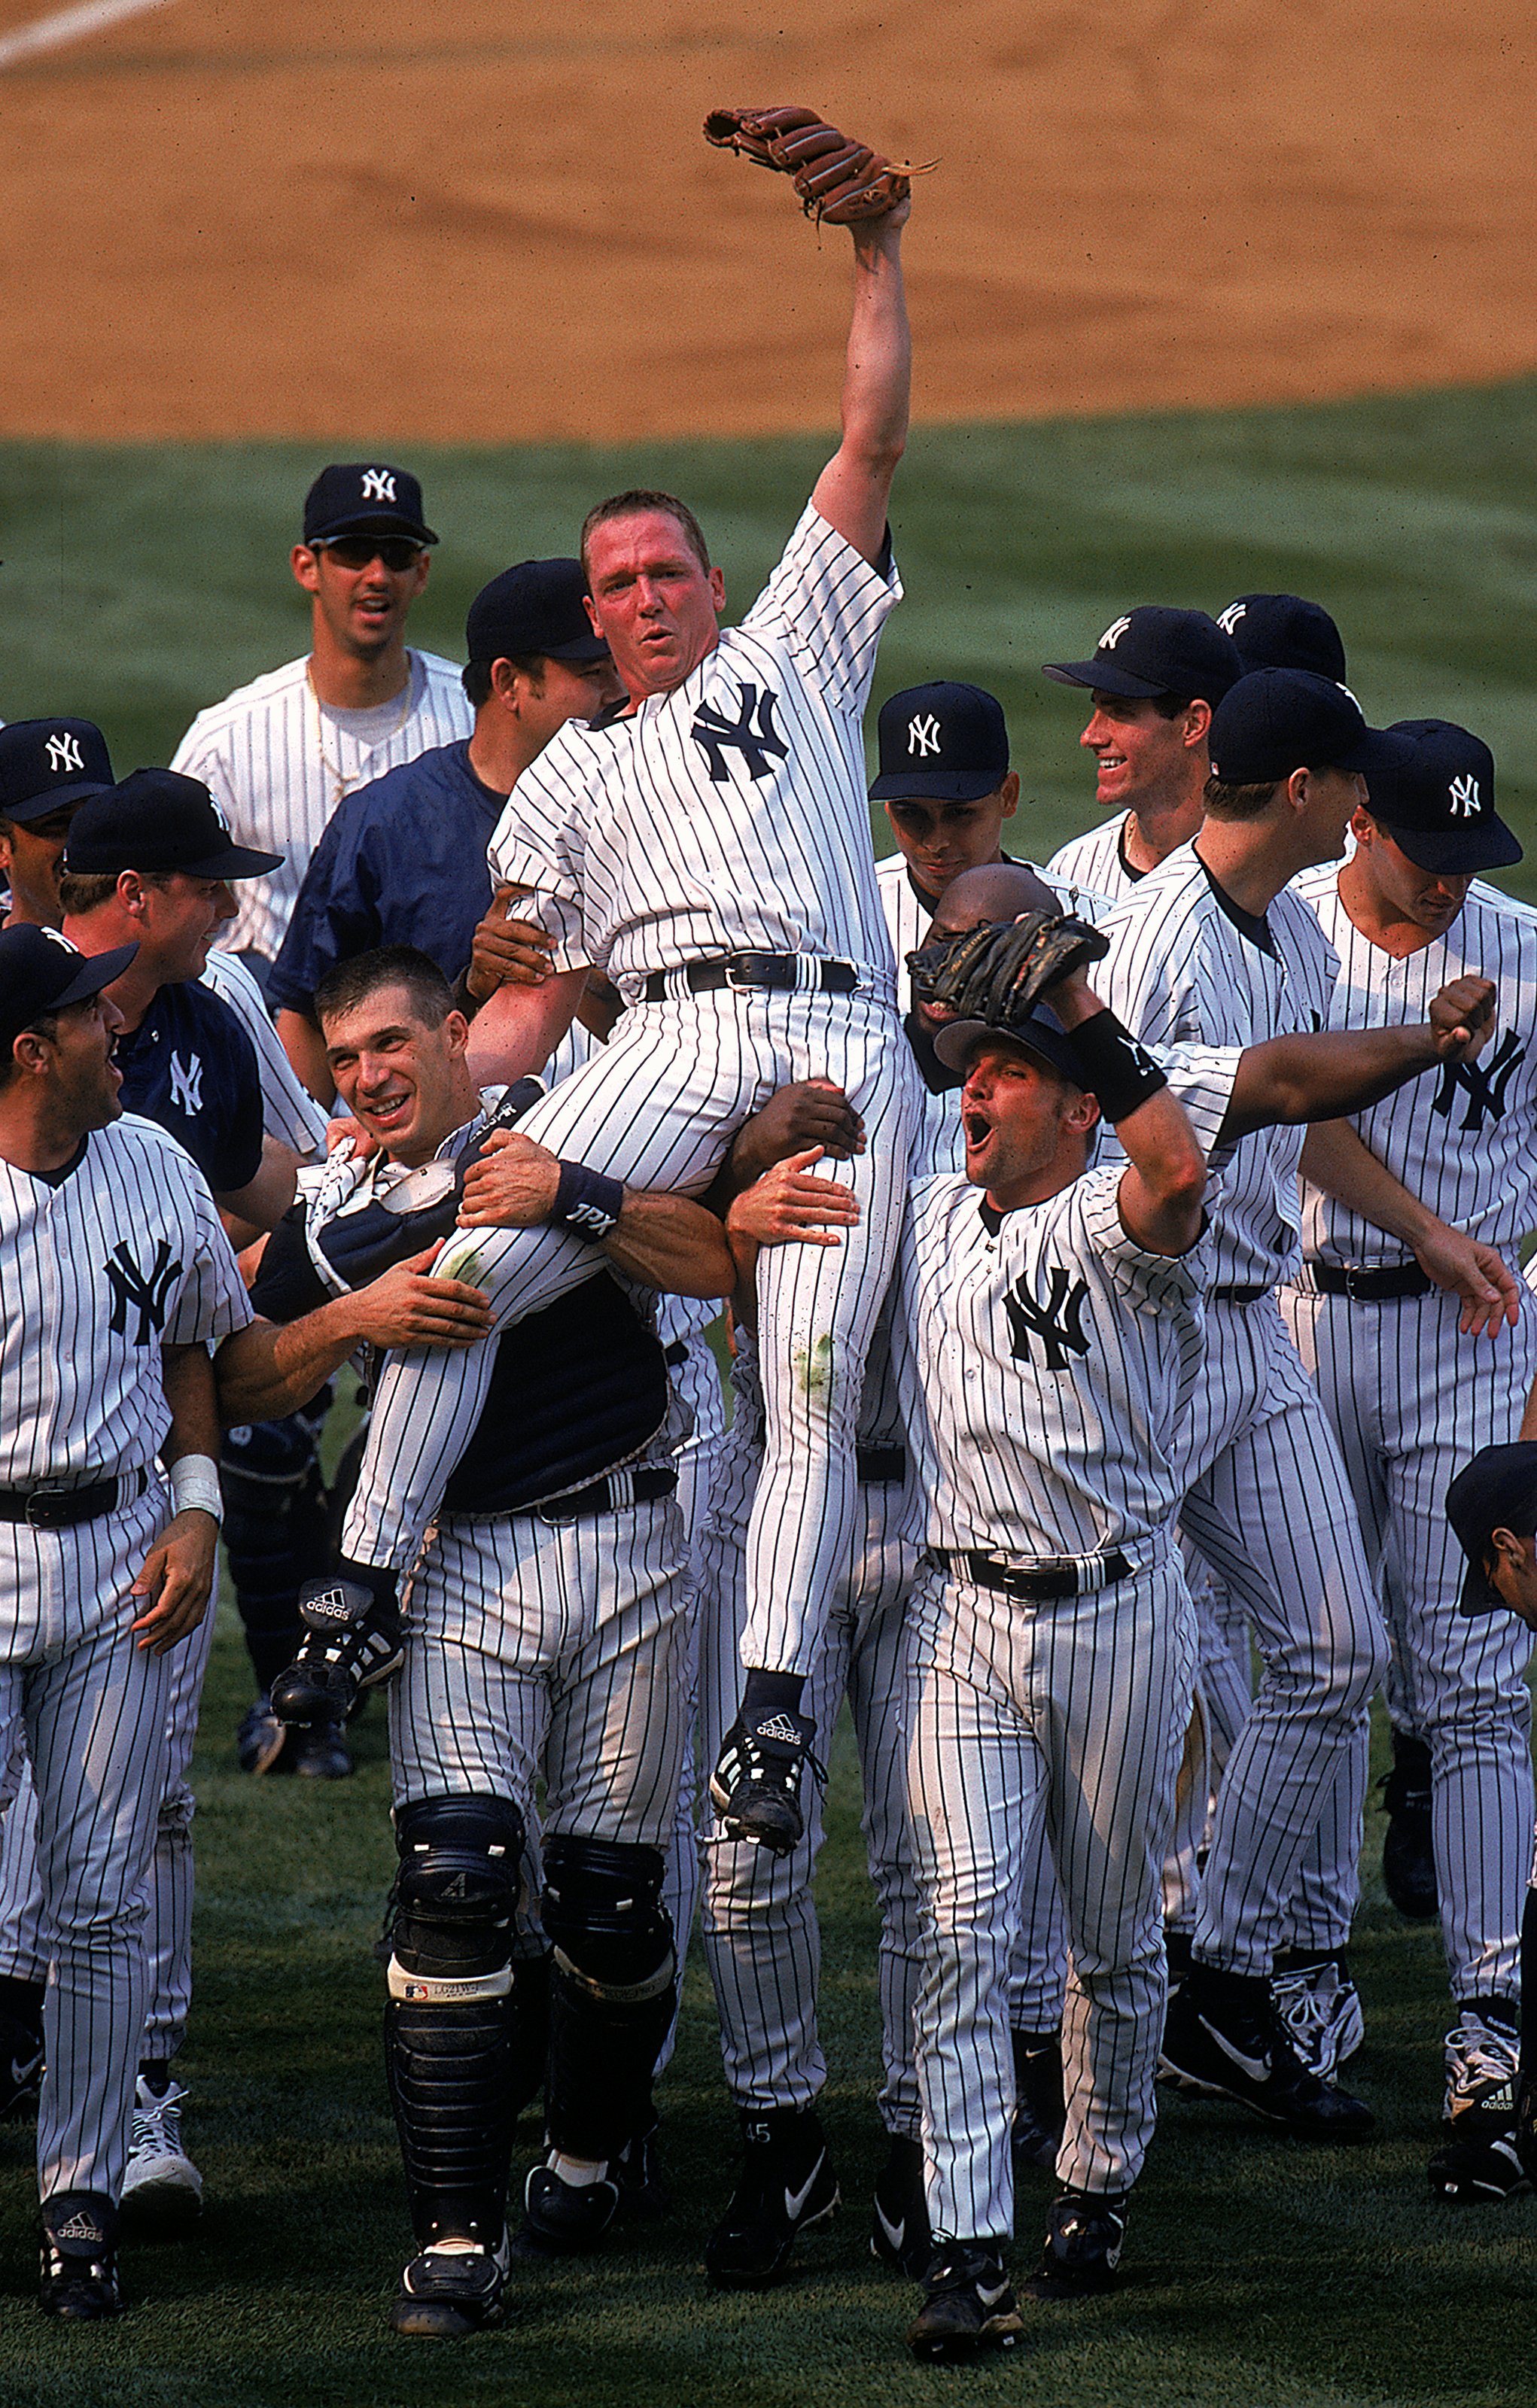 18 Jul 1999: David Cone #36 of the New York Yankees celebrates as his teammates lift him after winning the game against the Montreal Expos at Yankee Stadium in Bronx, New York. The Yankees defeated the Expos 6-0.